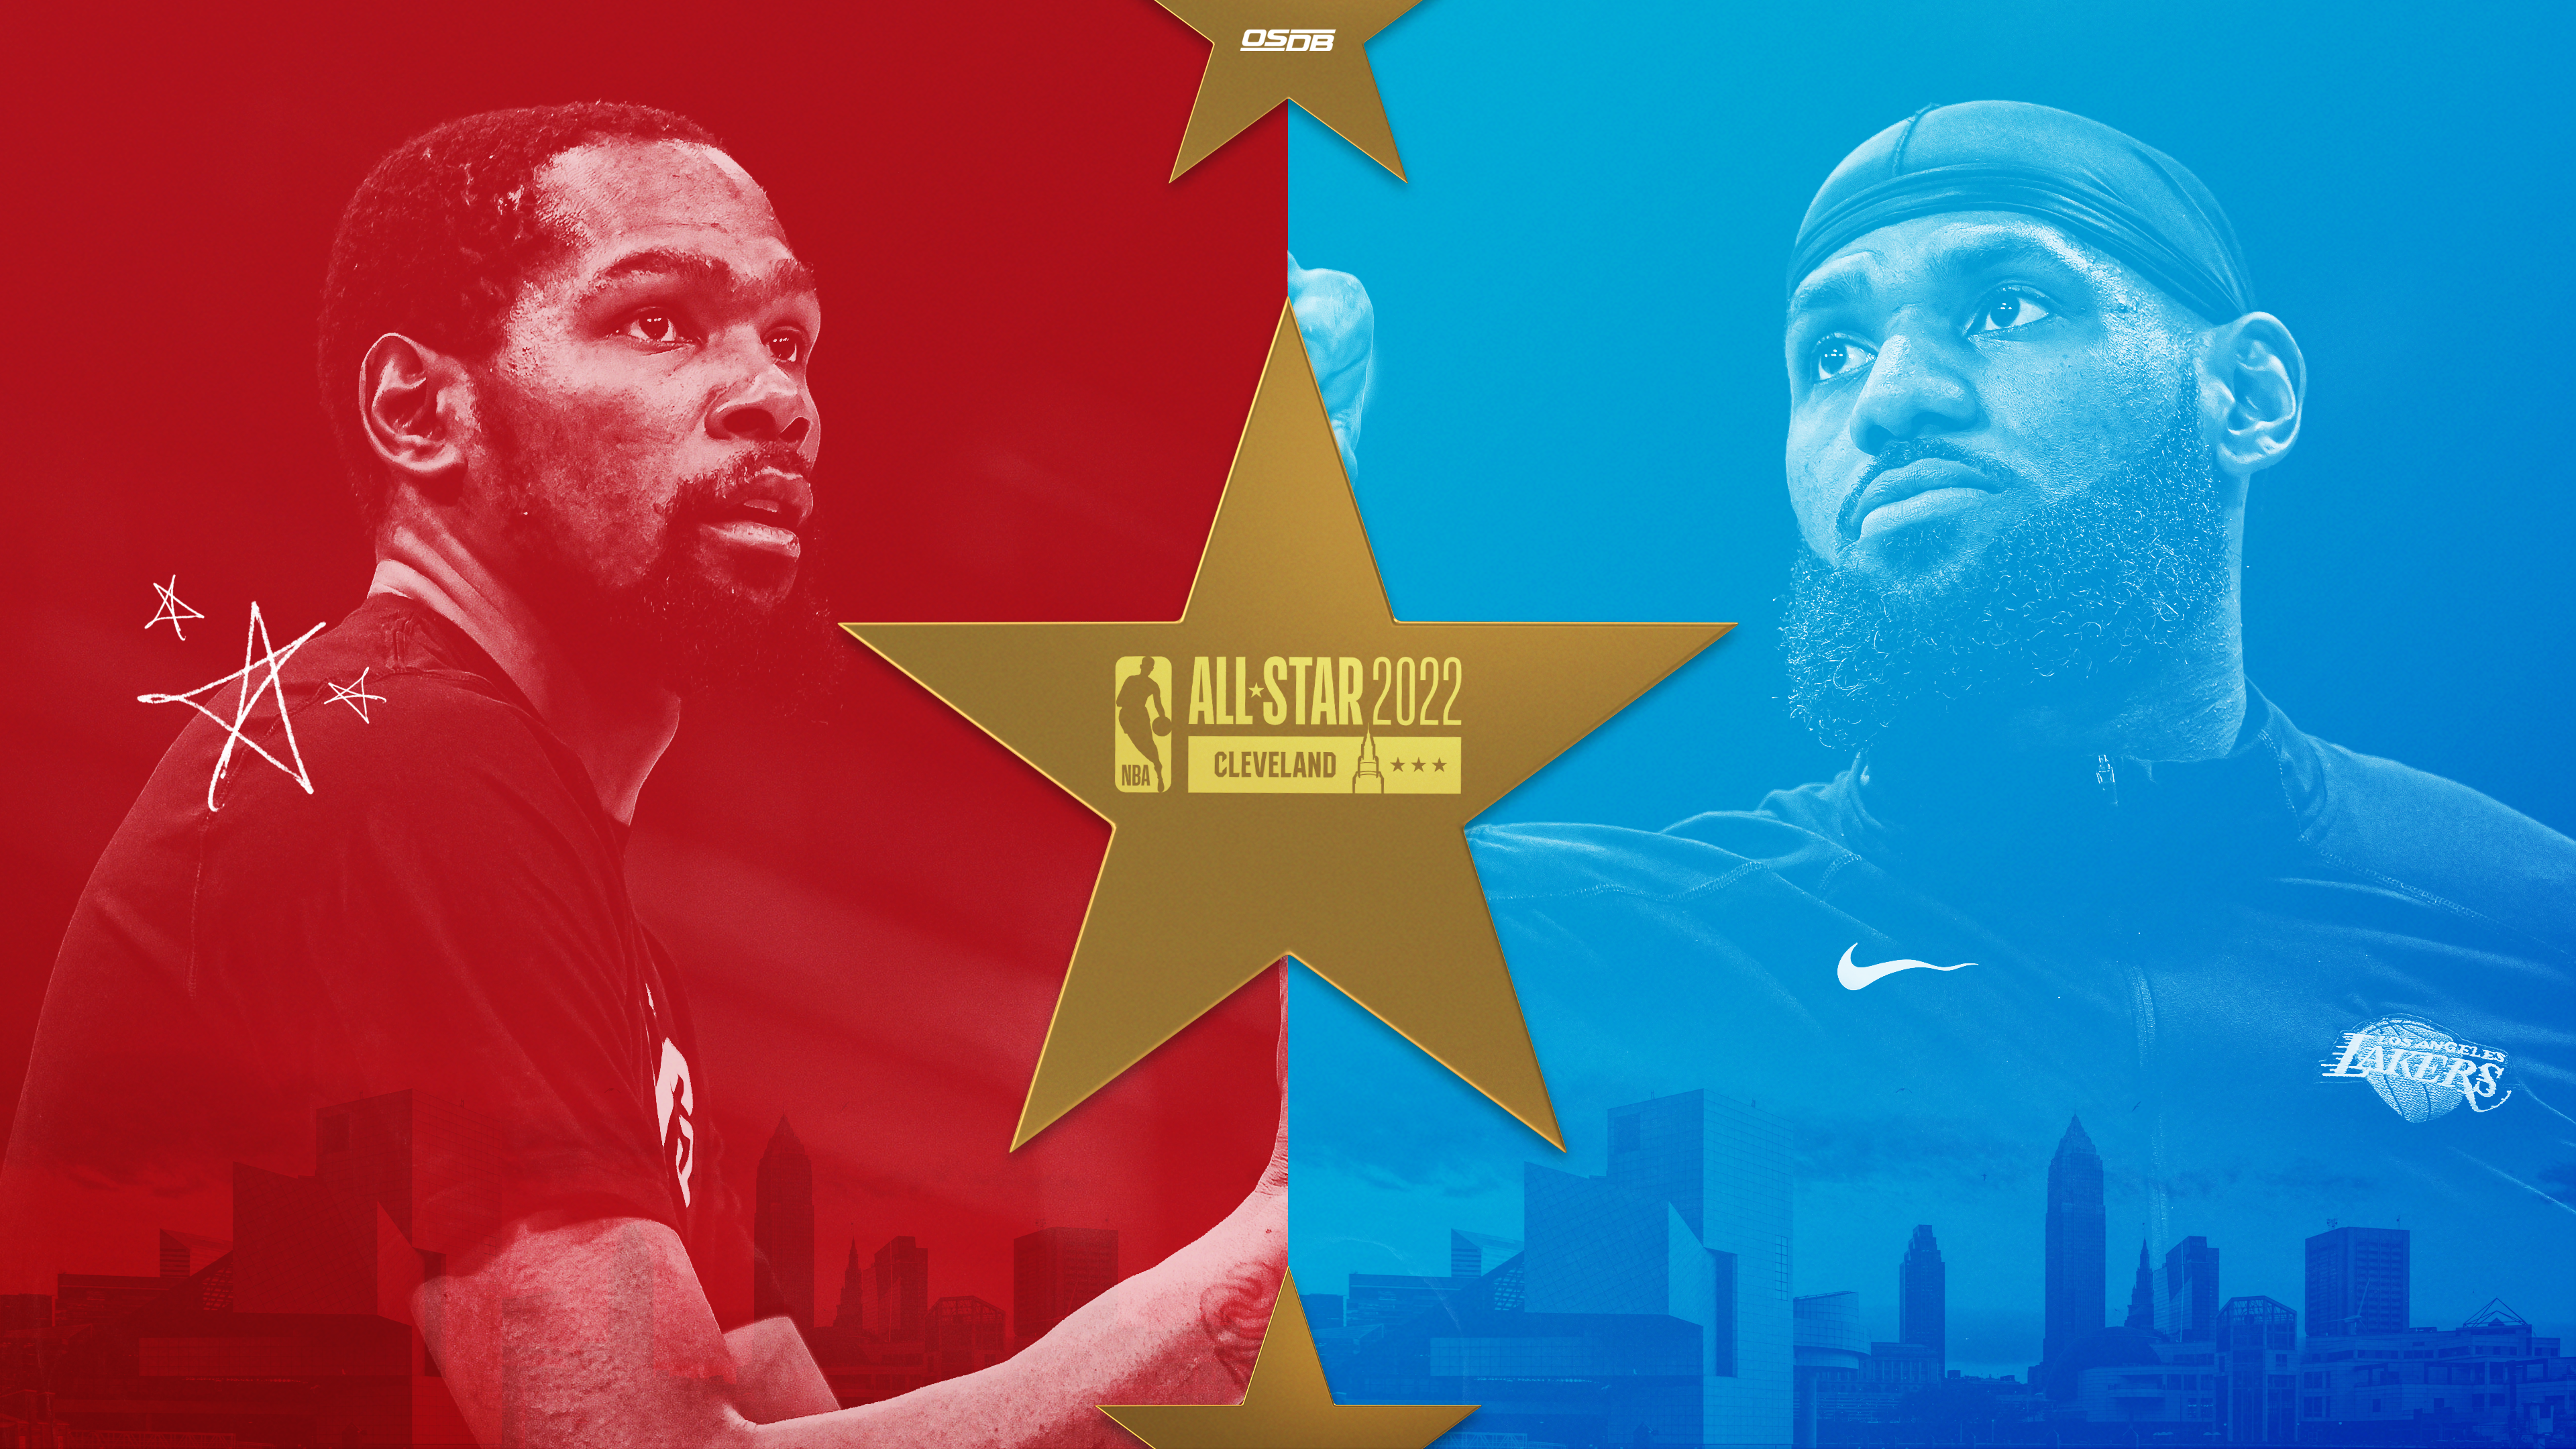 King James Returns to Cleveland with Team LeBron for 71st NBA All-Star Game